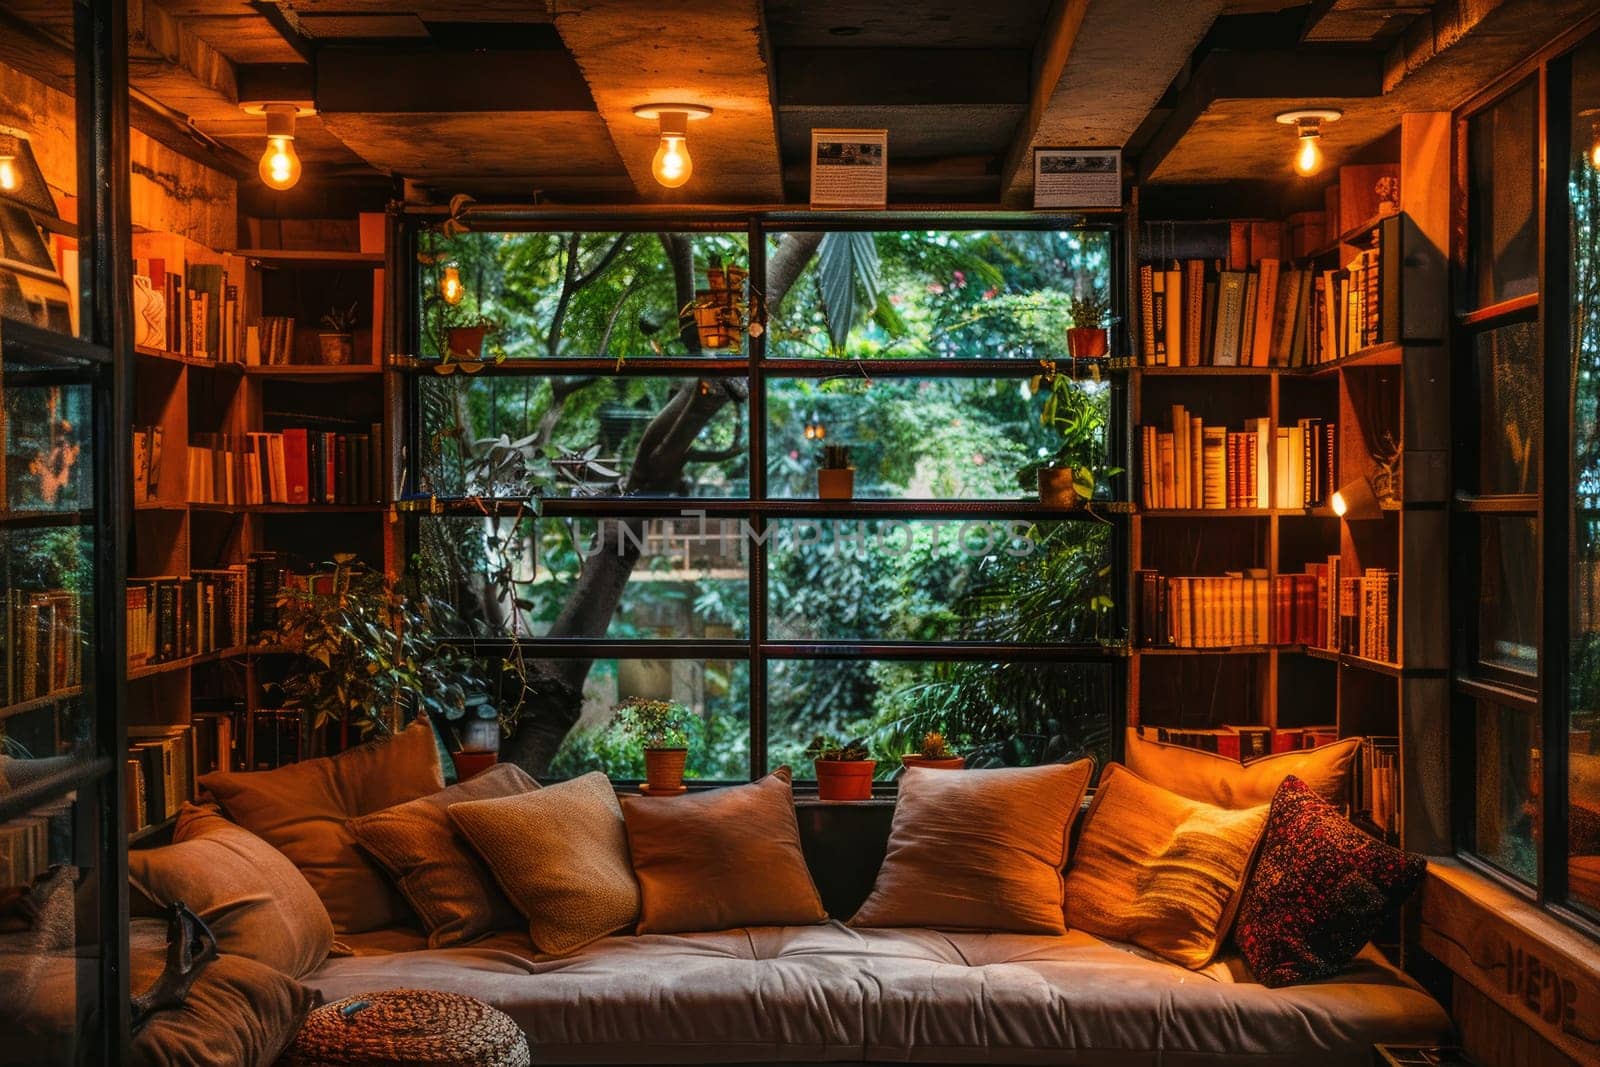 A cozy reading nook with shelves of books